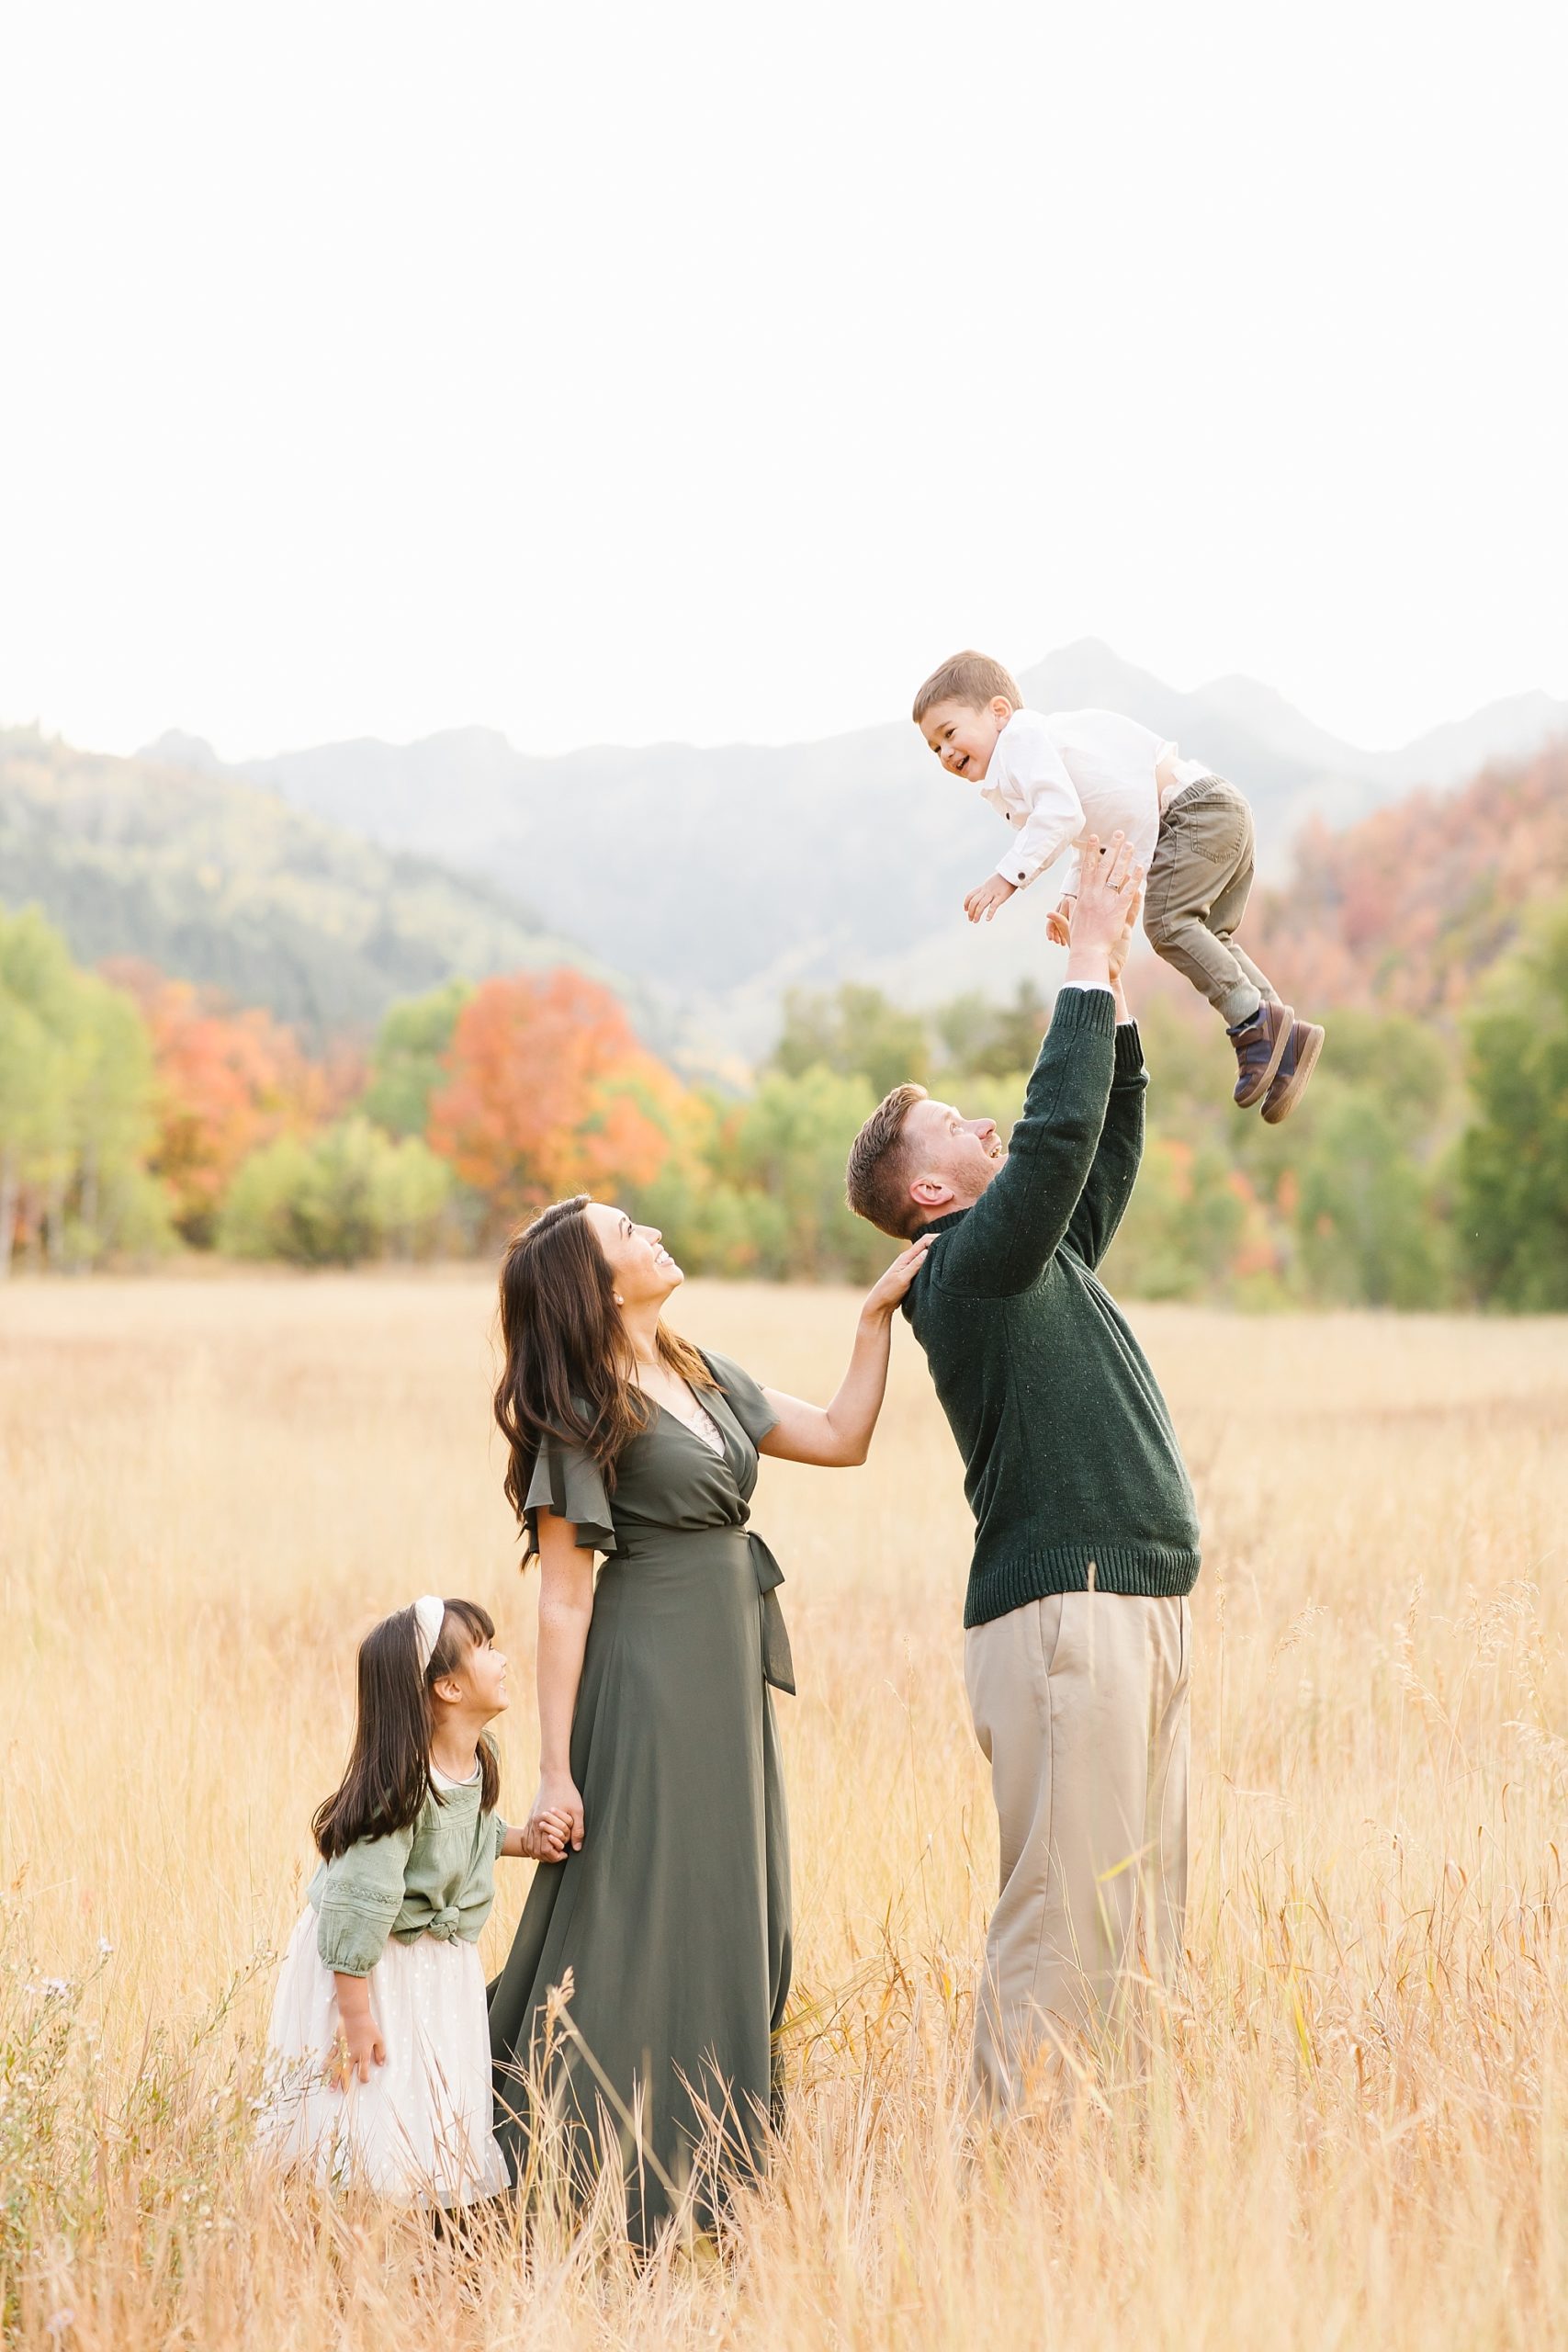 Fun and playful family photo ideas